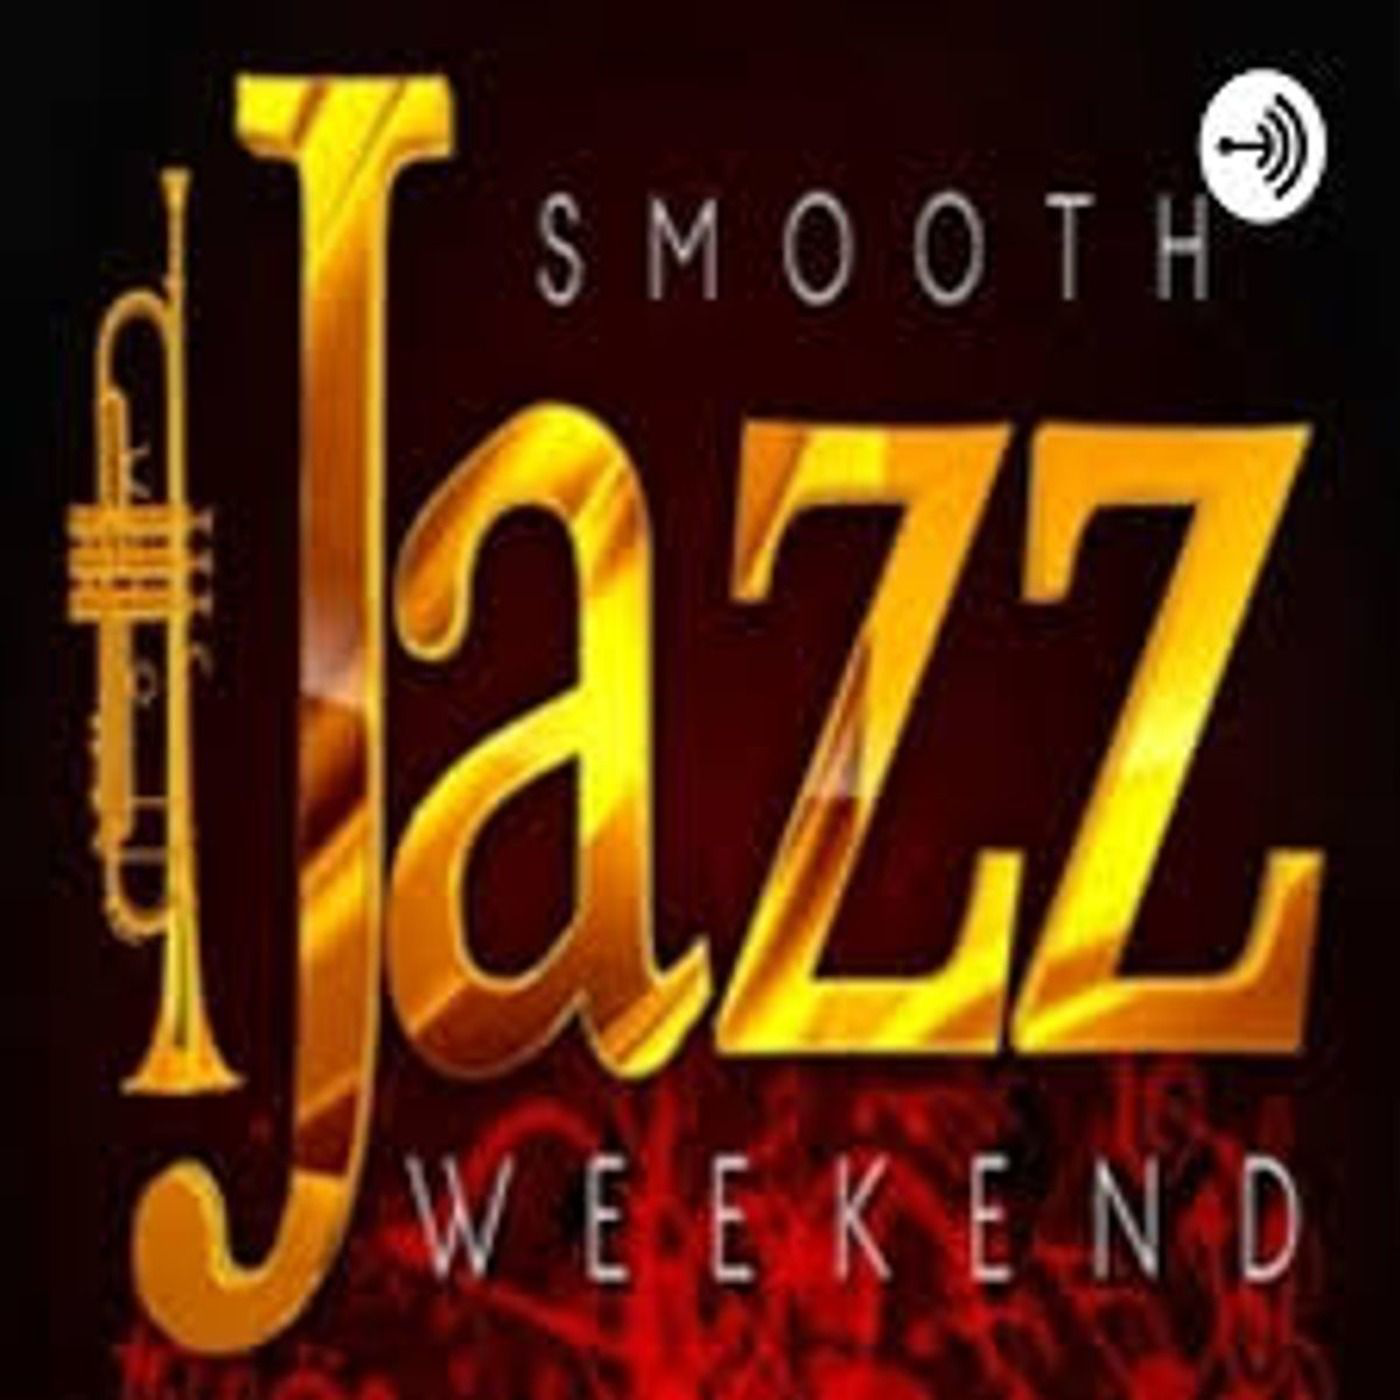 A highlight from Smooth Jazz Weekend with Tina E. (Honey Girl)